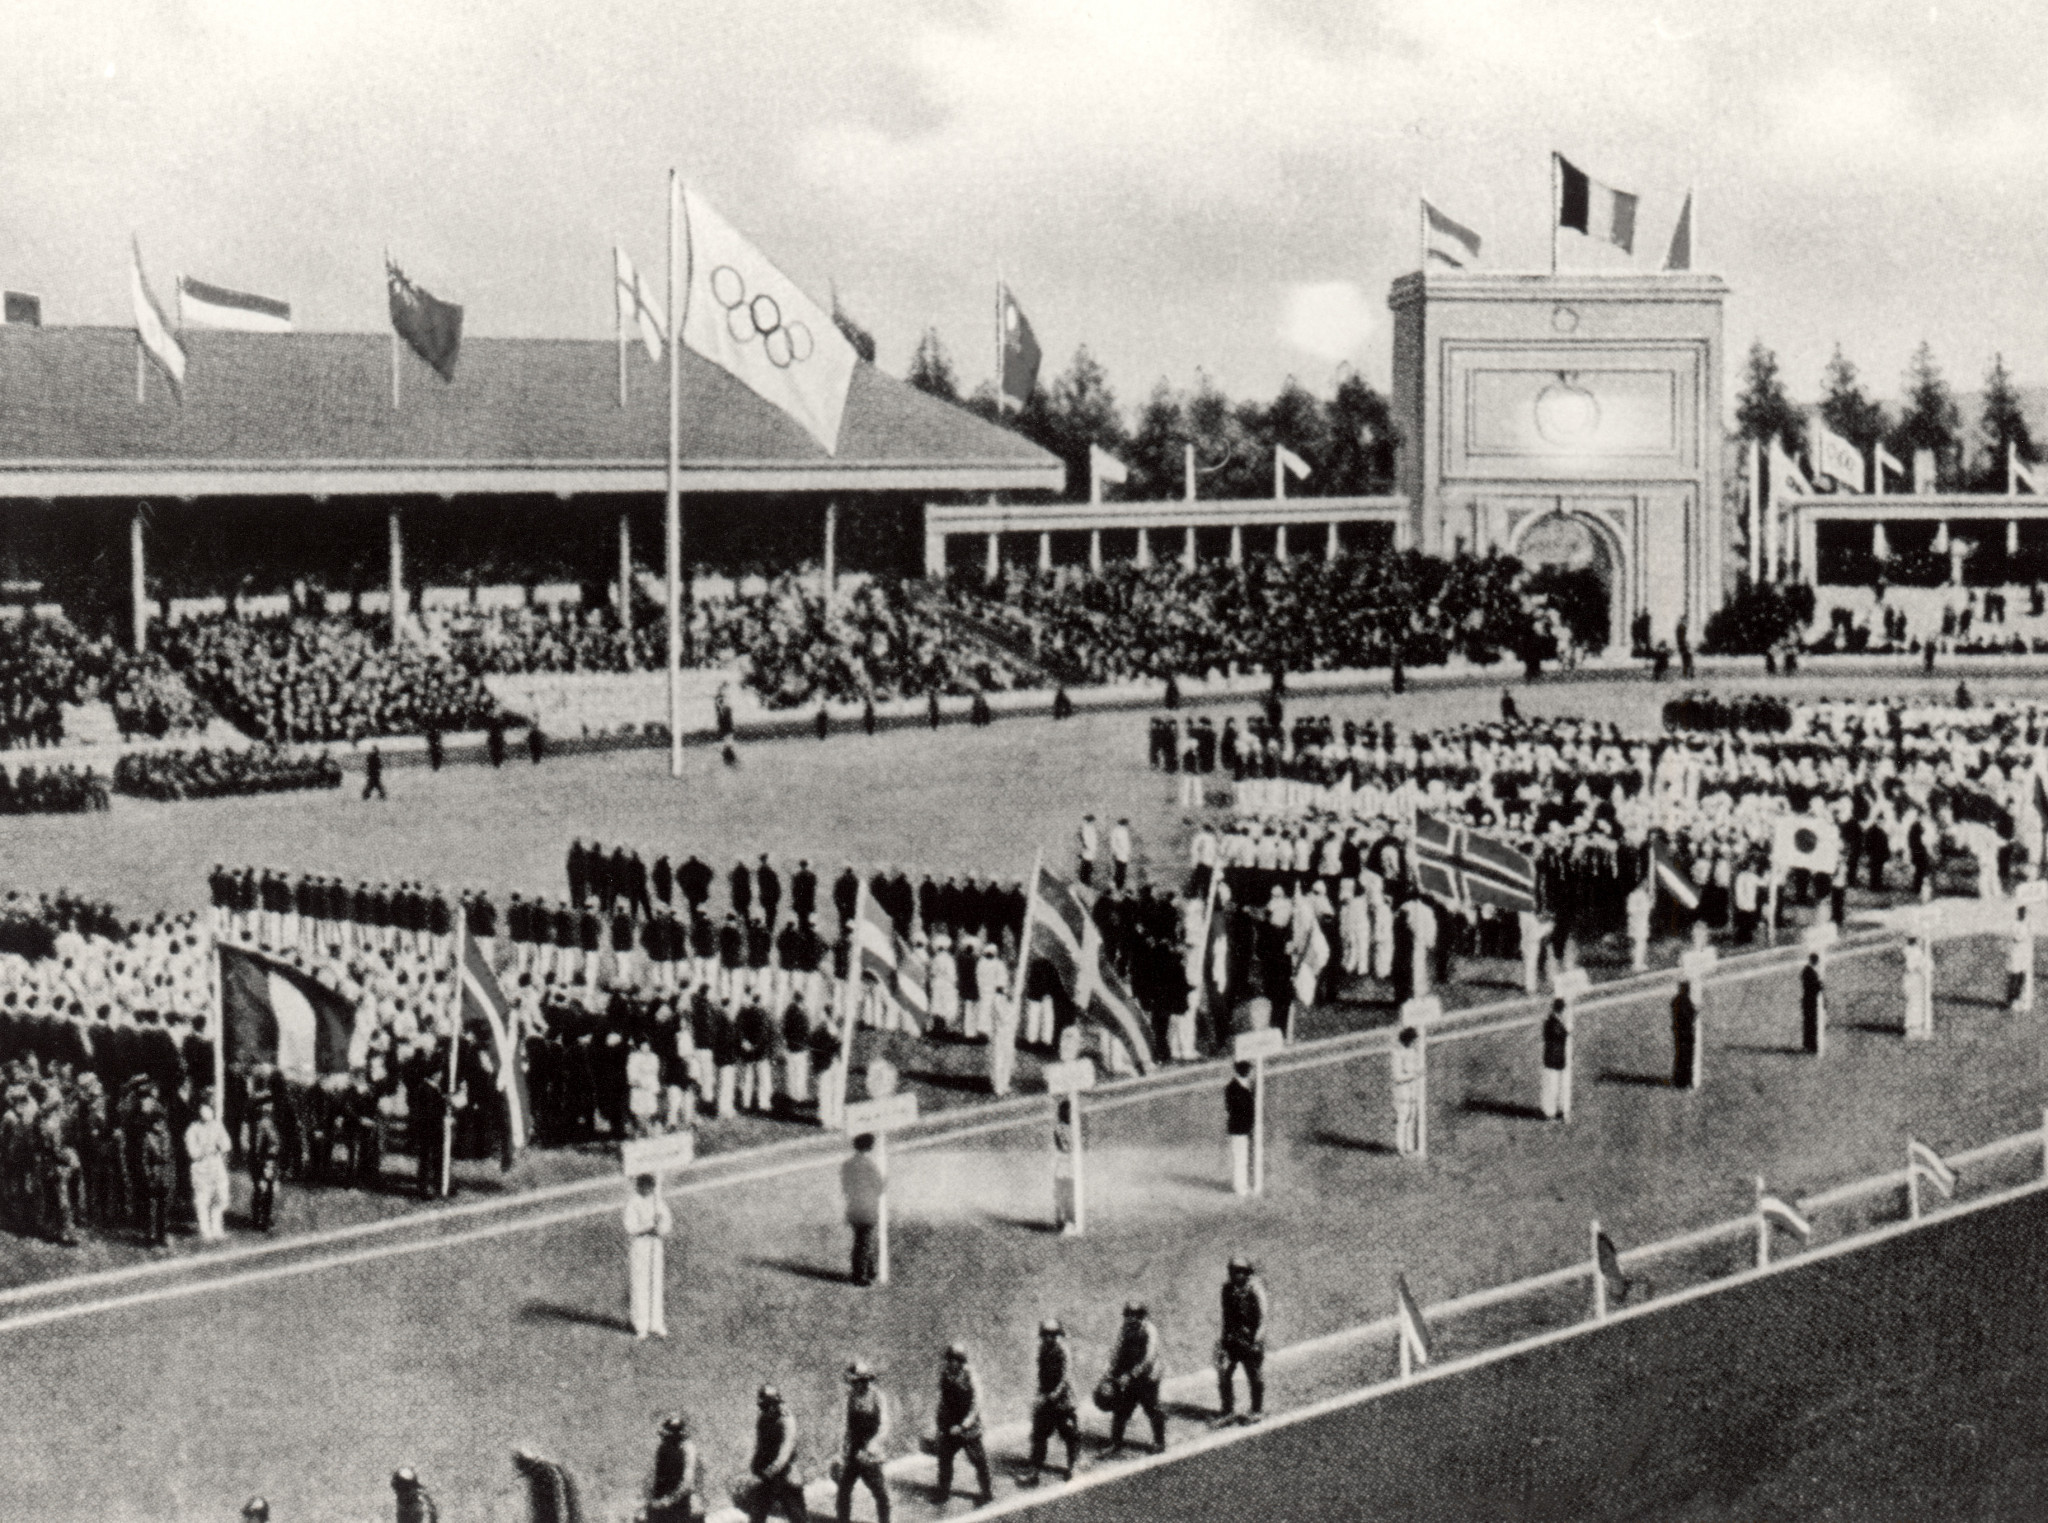 The Antwerp 1920 Opening Ceremony - the first to feature an athlete taking the Olympic Oath ©Getty Images